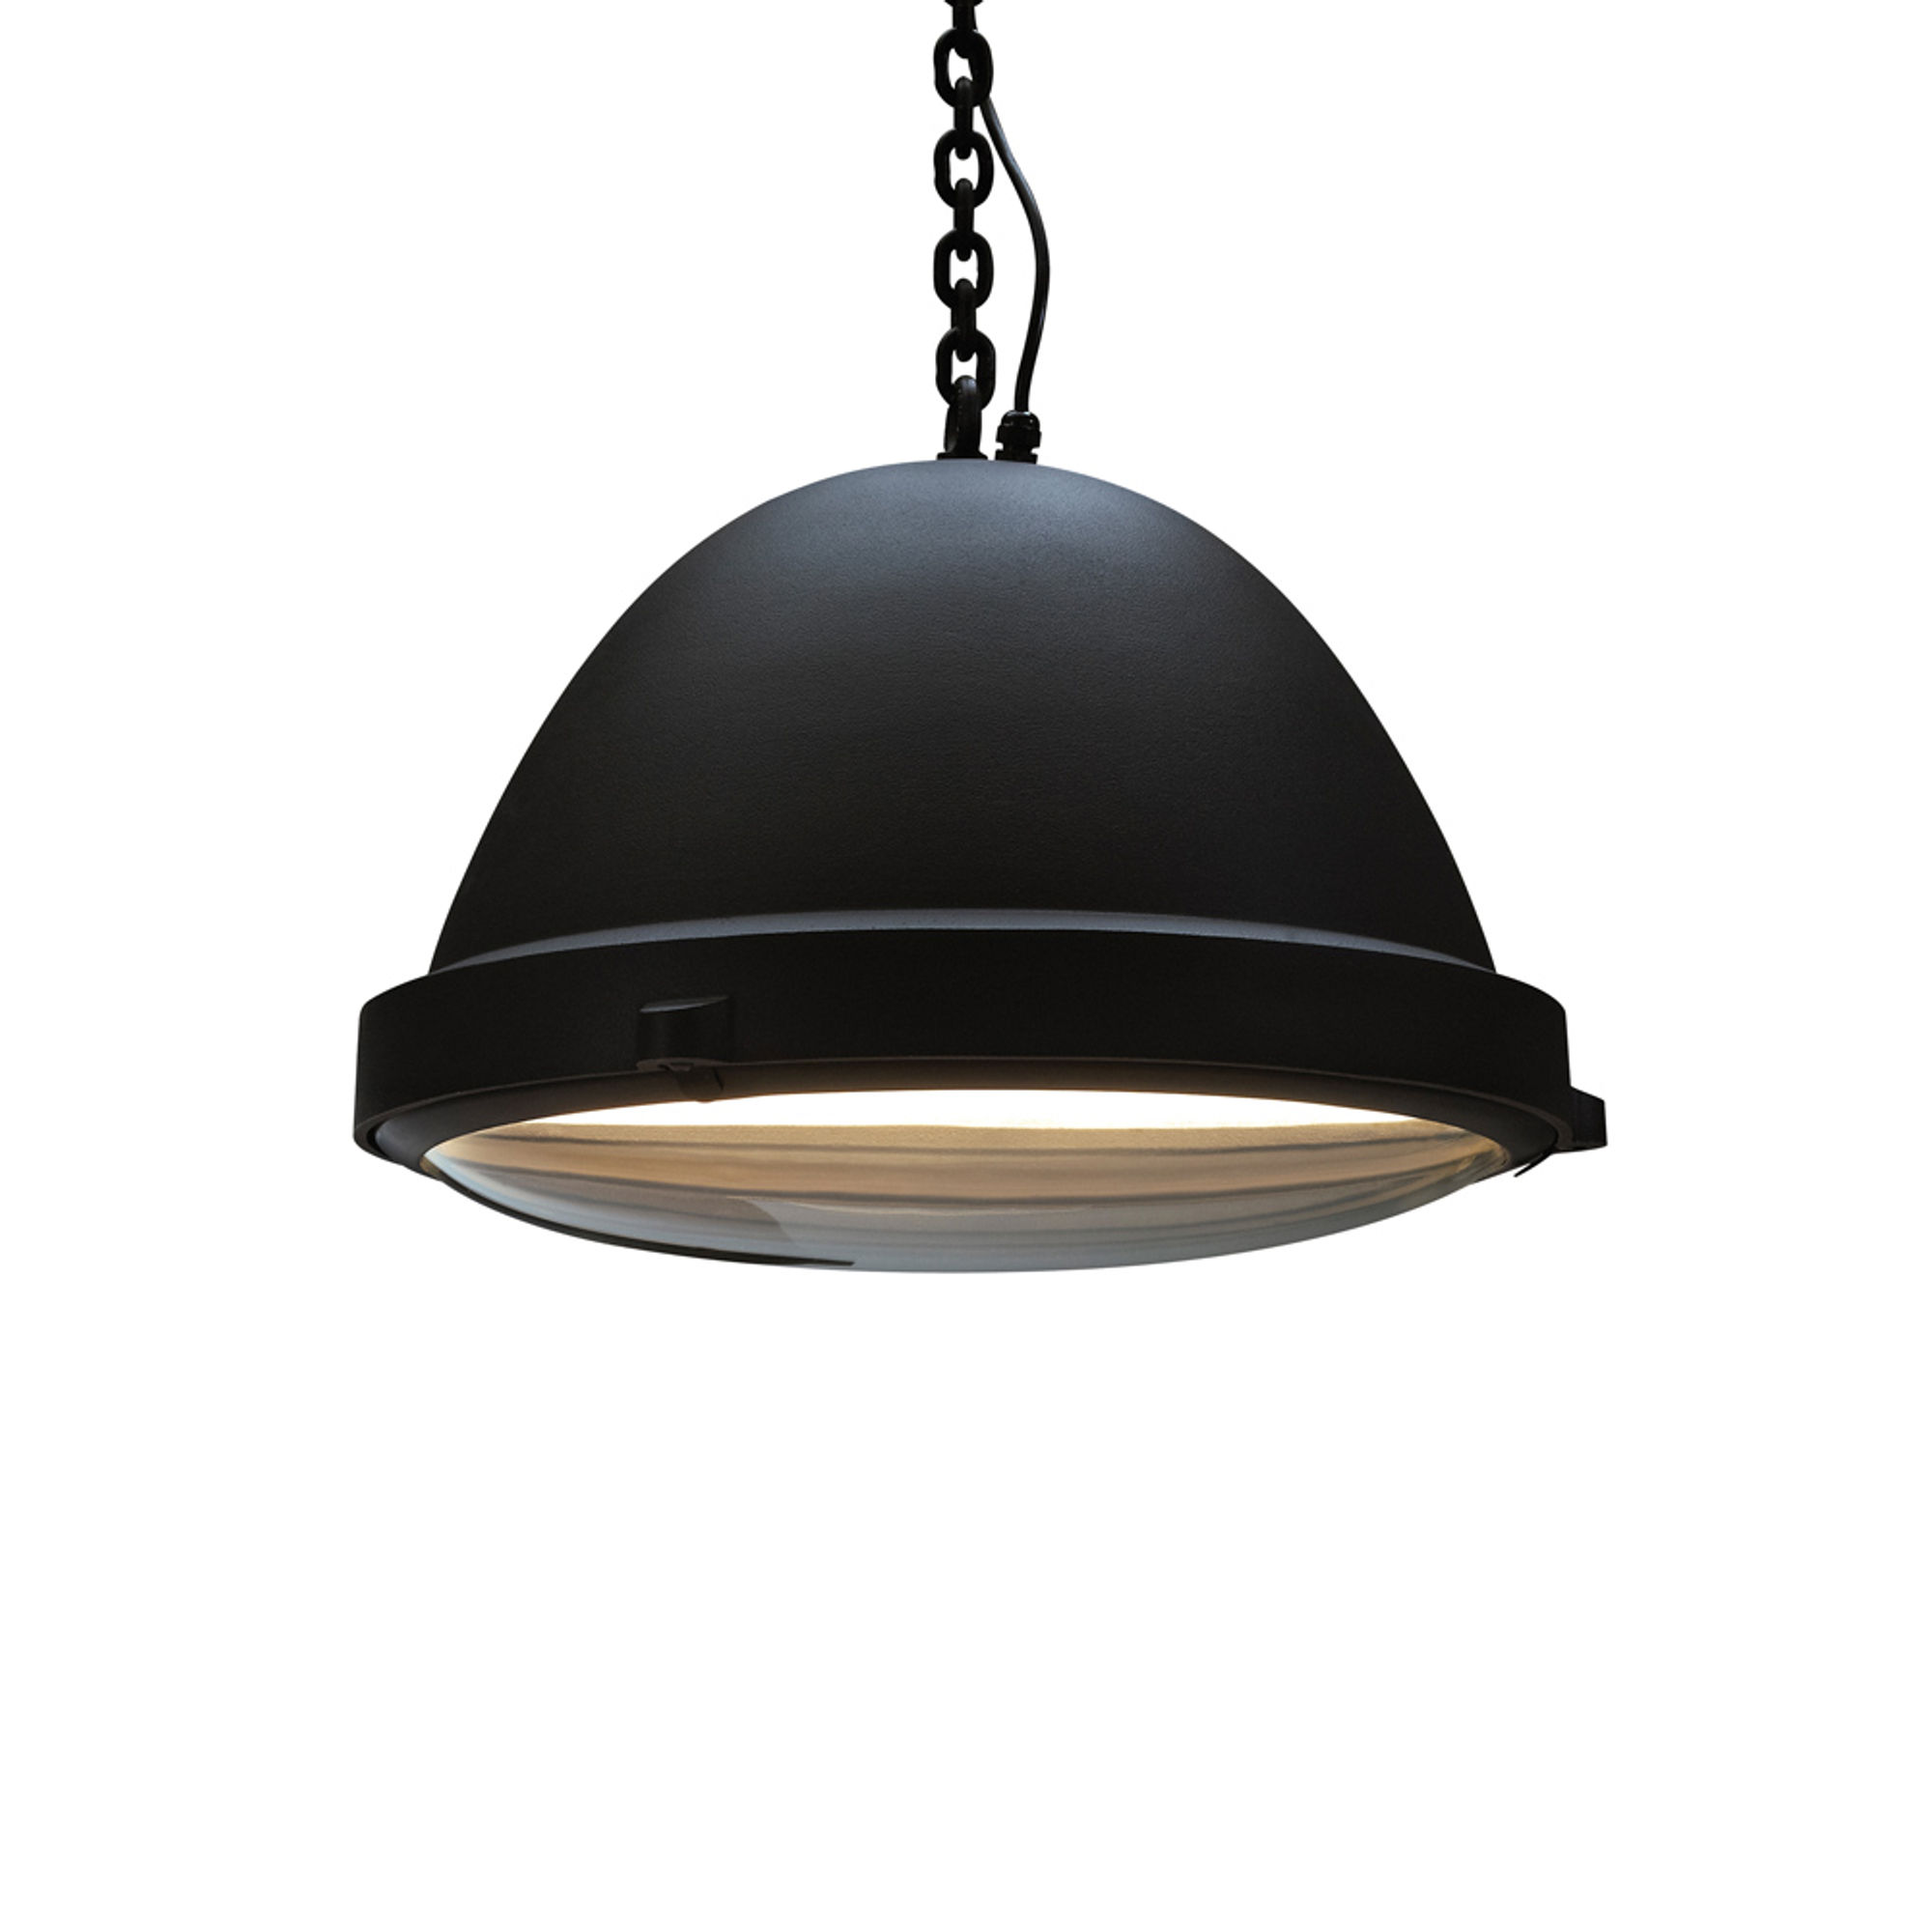 The Outsider Pendant by Jacco Maris 0